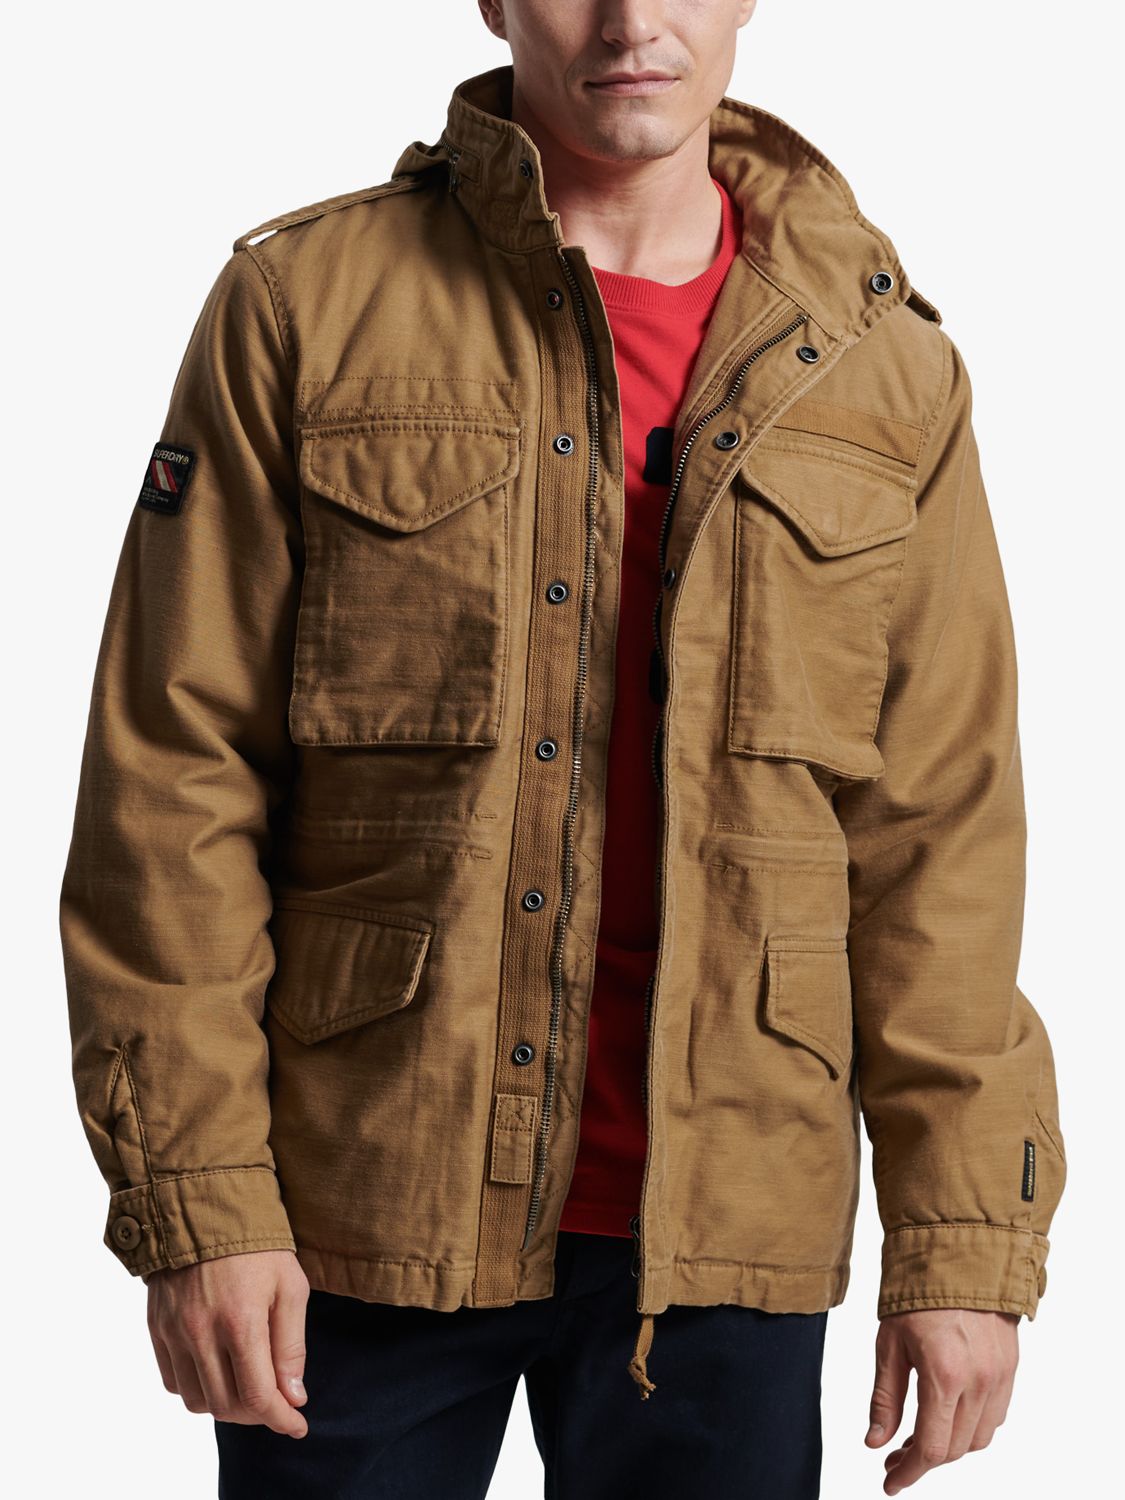 Superdry Military M65 Field Borg Lined Jacket, Tan at John Lewis & Partners